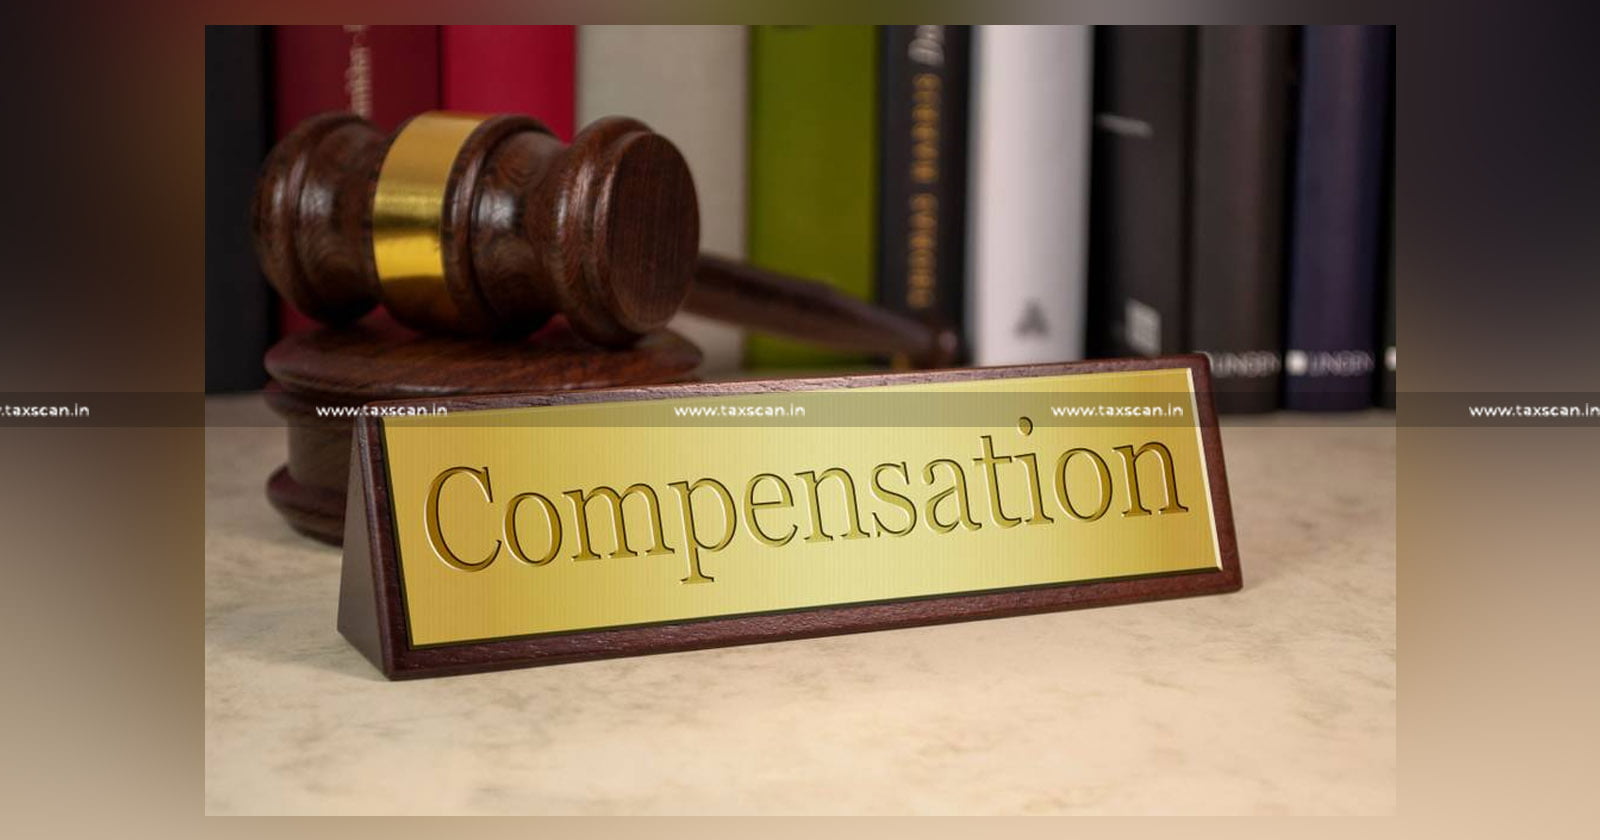 Compensation - Builder in lieu - Consumer Court - Consumer Court Order - Capital Receipt - Income Tax - ITAT - Revision Proceedings - Taxscan